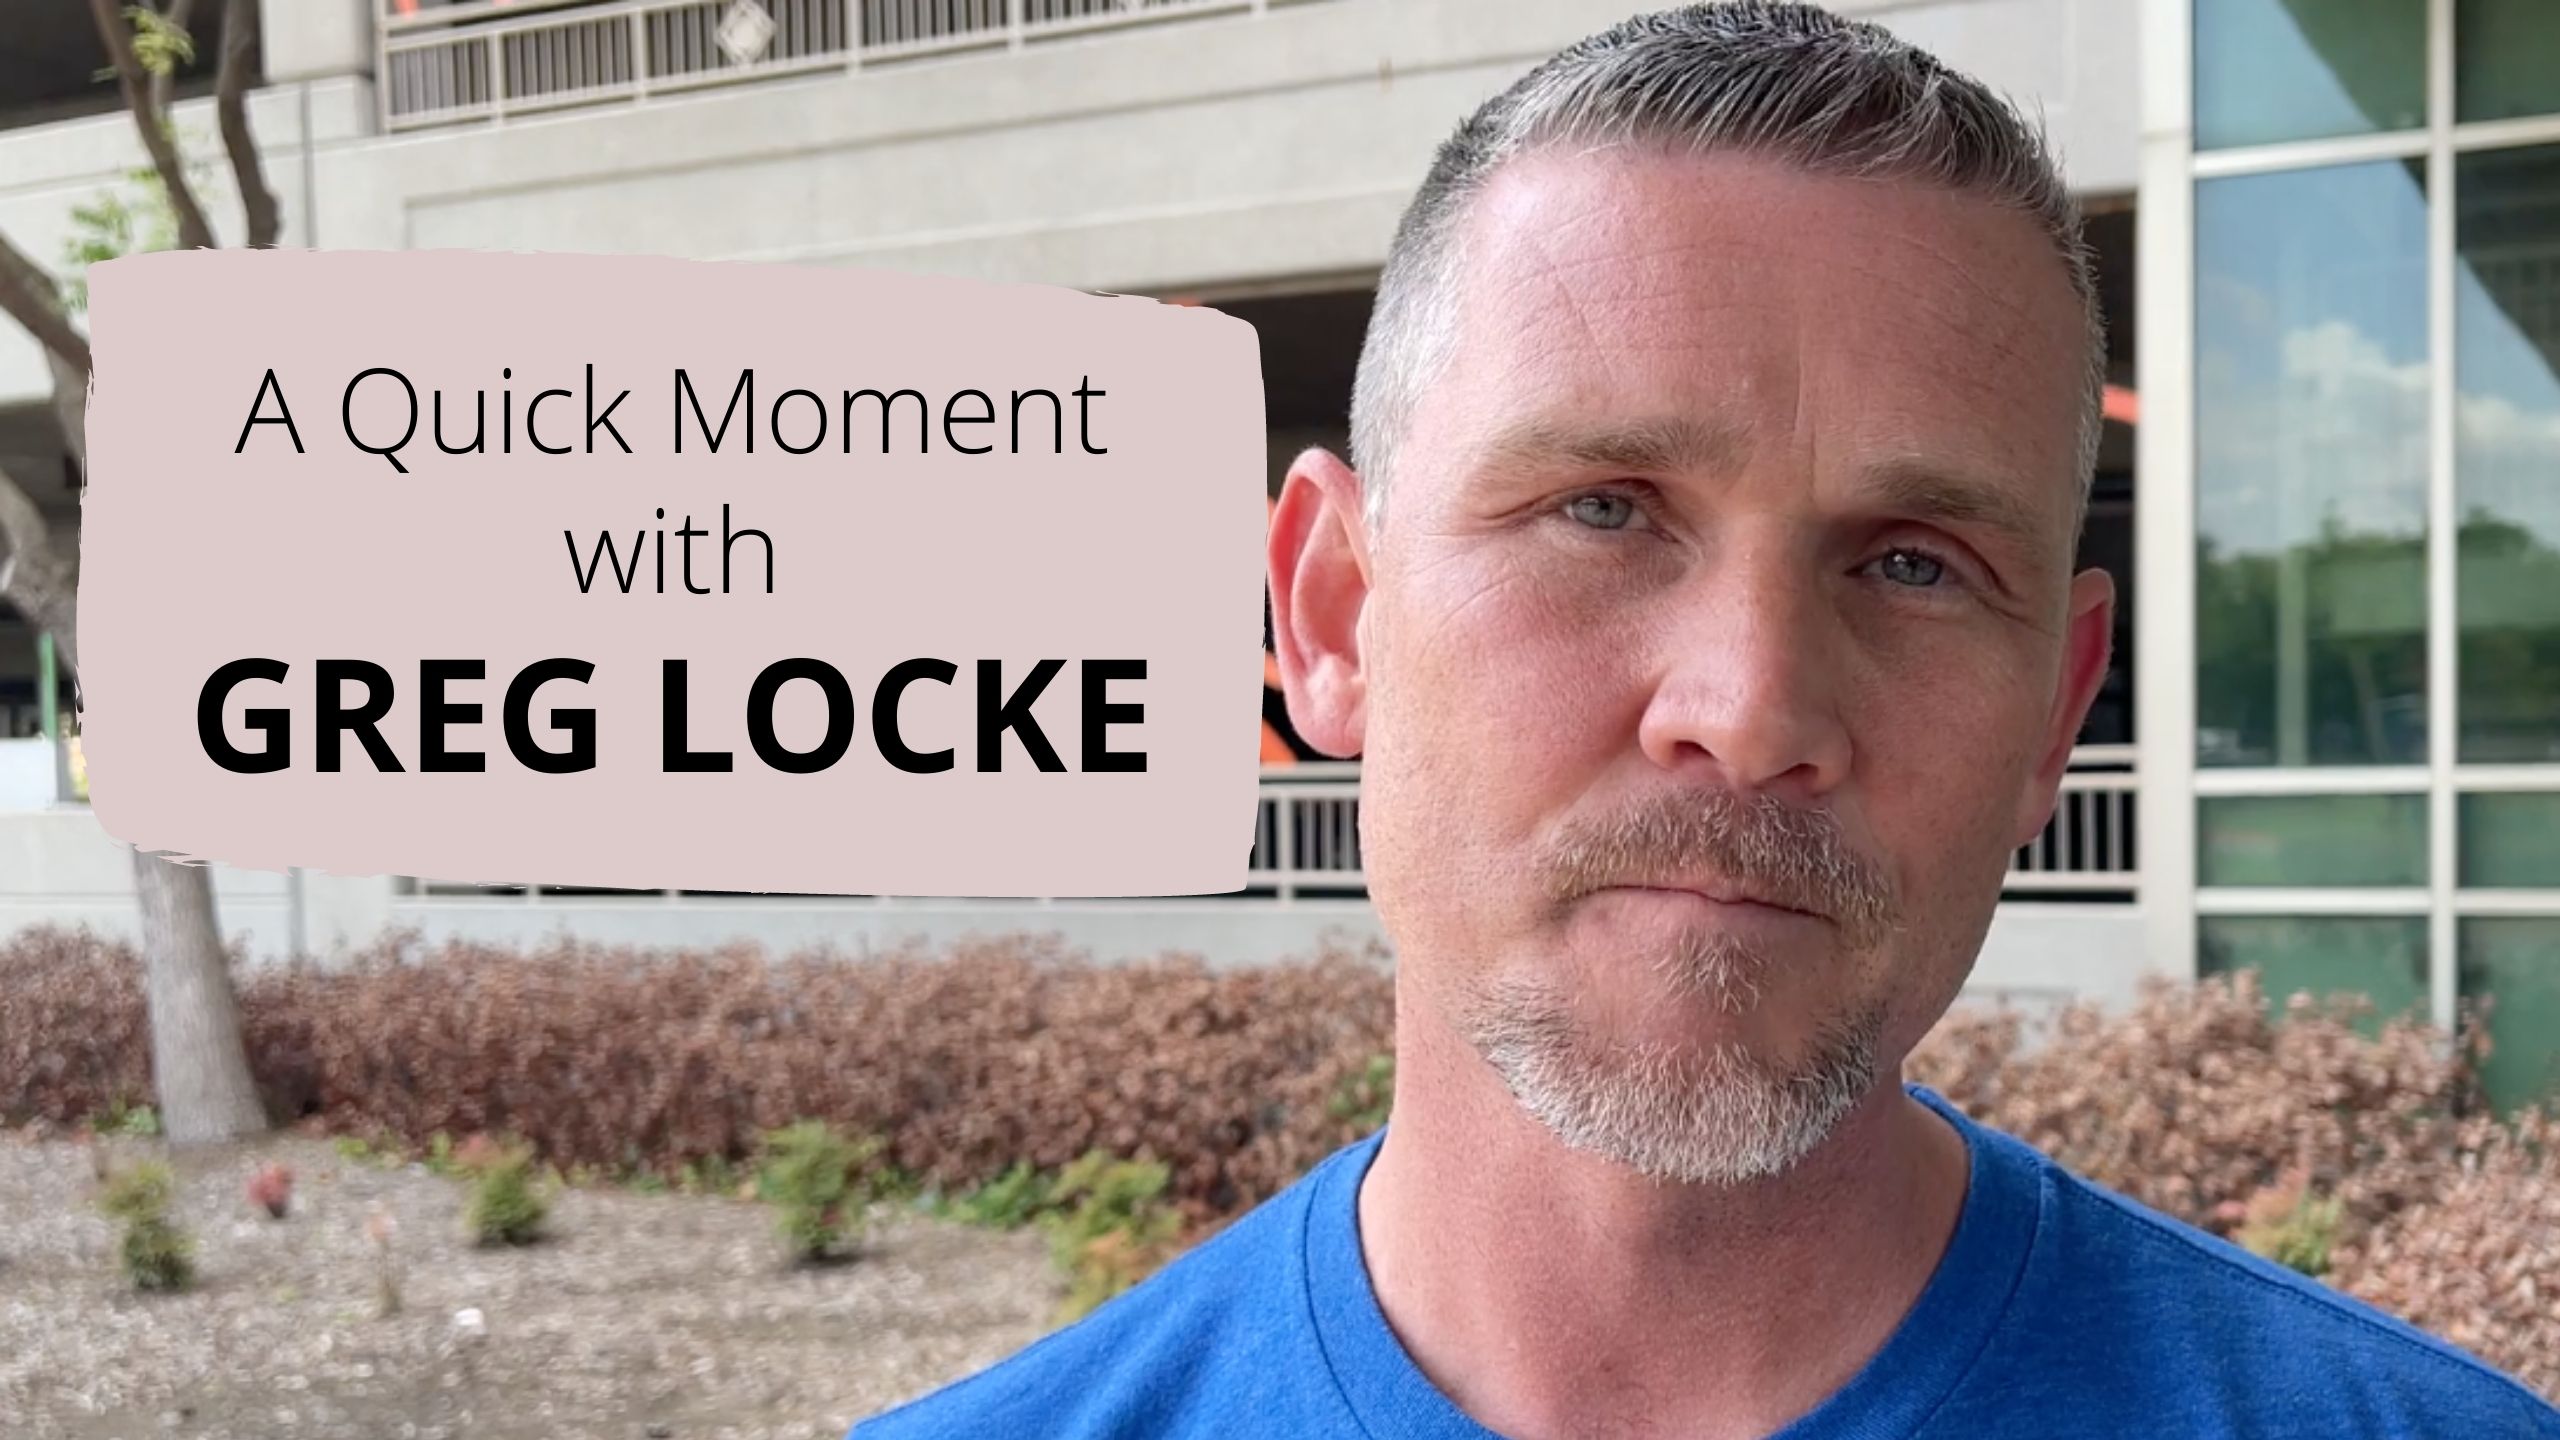 A Quick Moment with Greg Locke